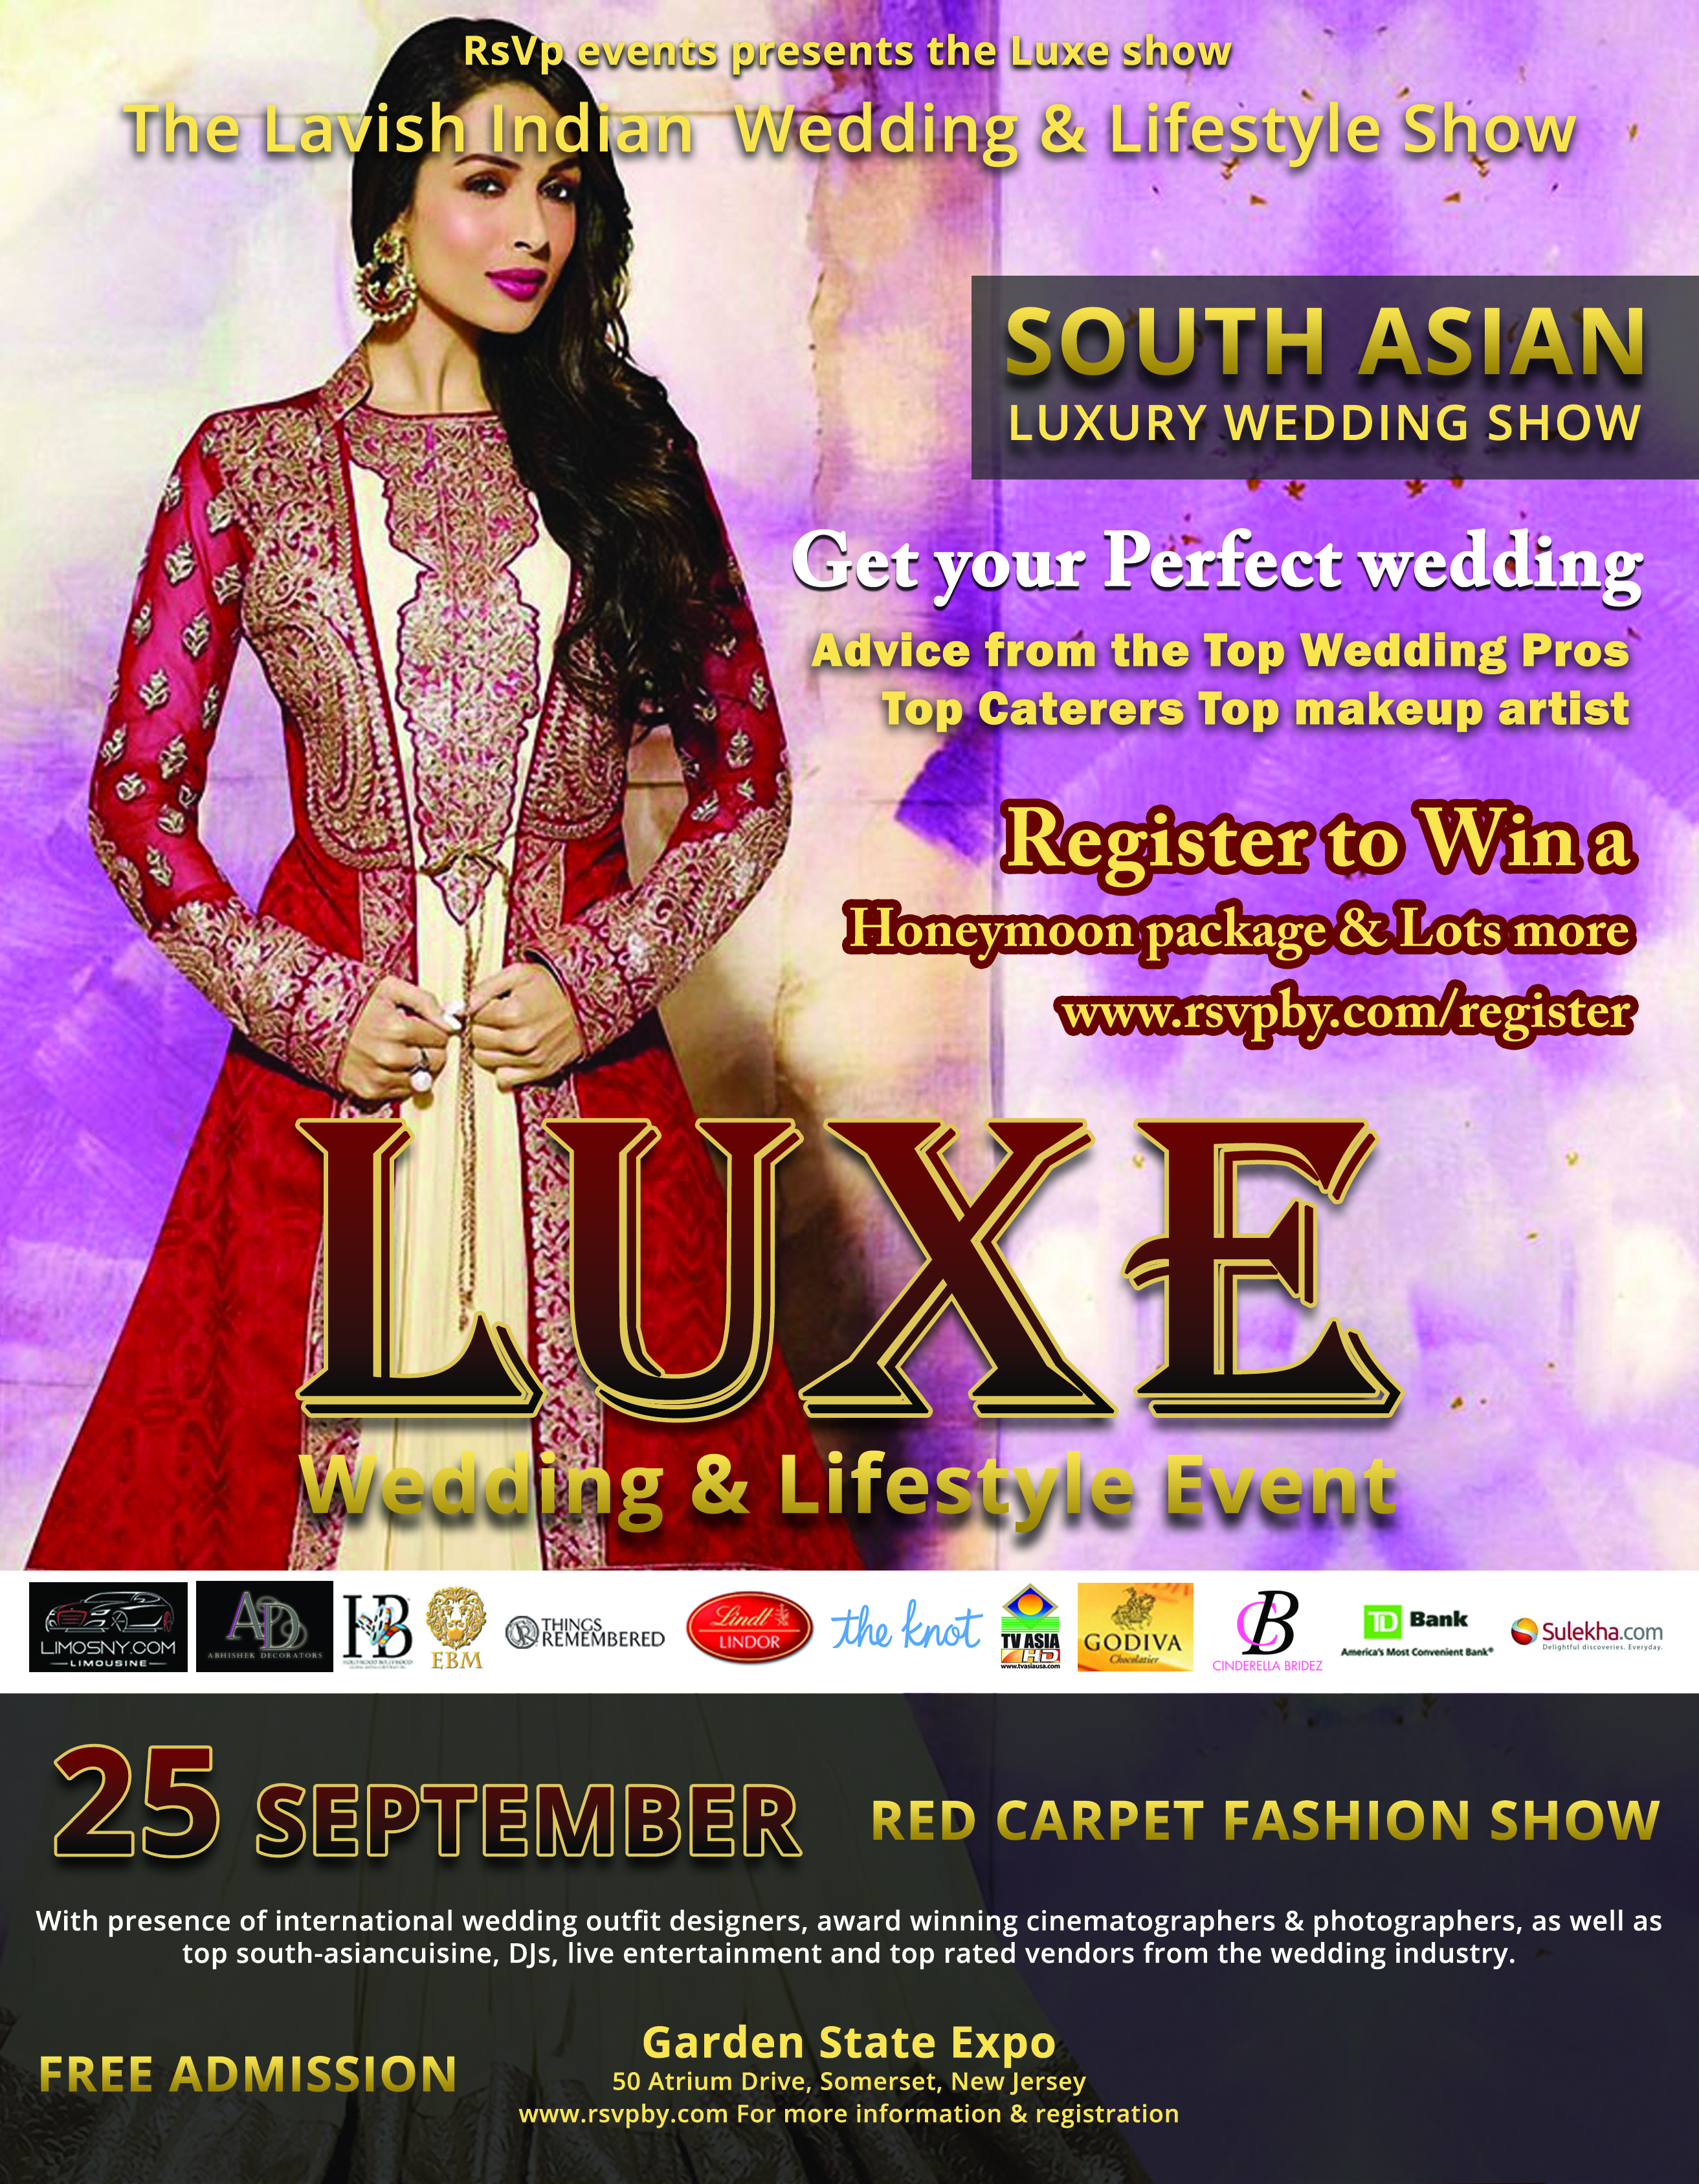 LUXE Wedding & Lifestyle Event at the Garden State Exhibit Center